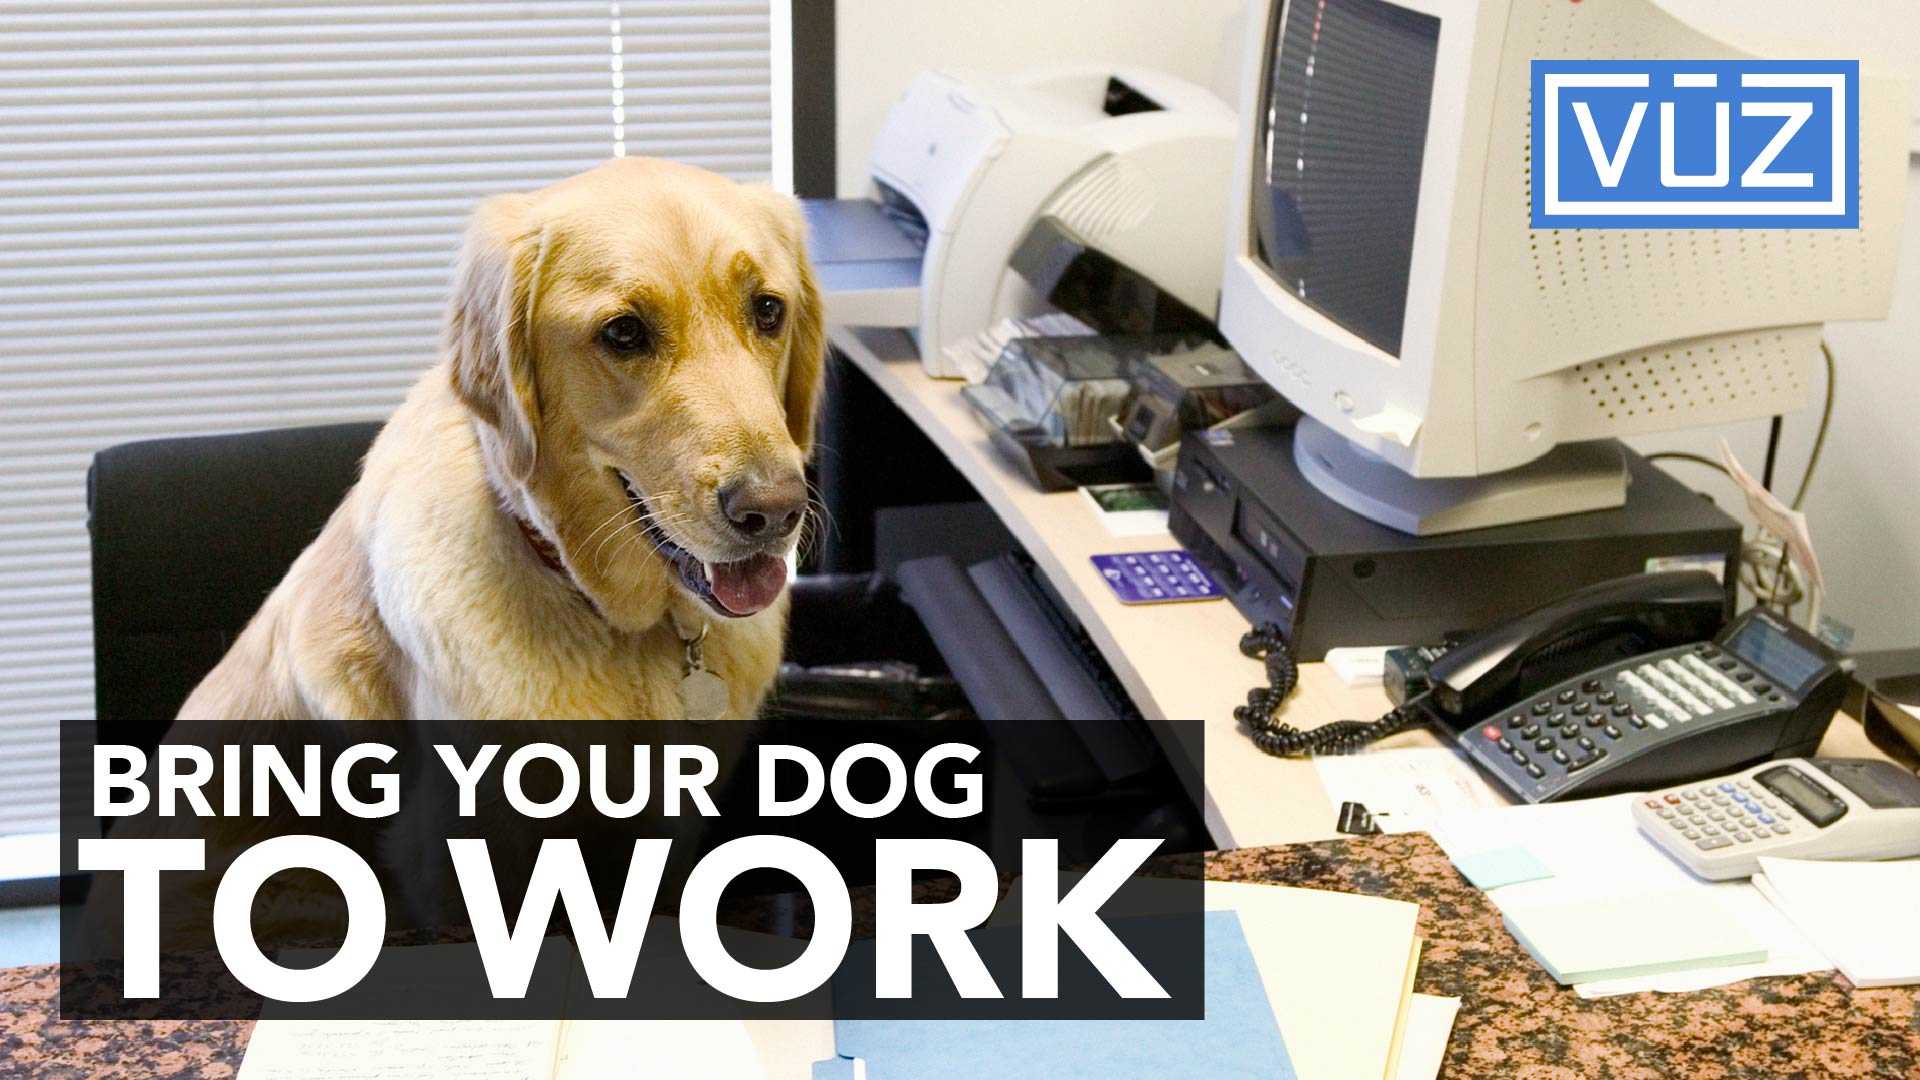 Bringing your dog to work is beneficial to both employees AND employers